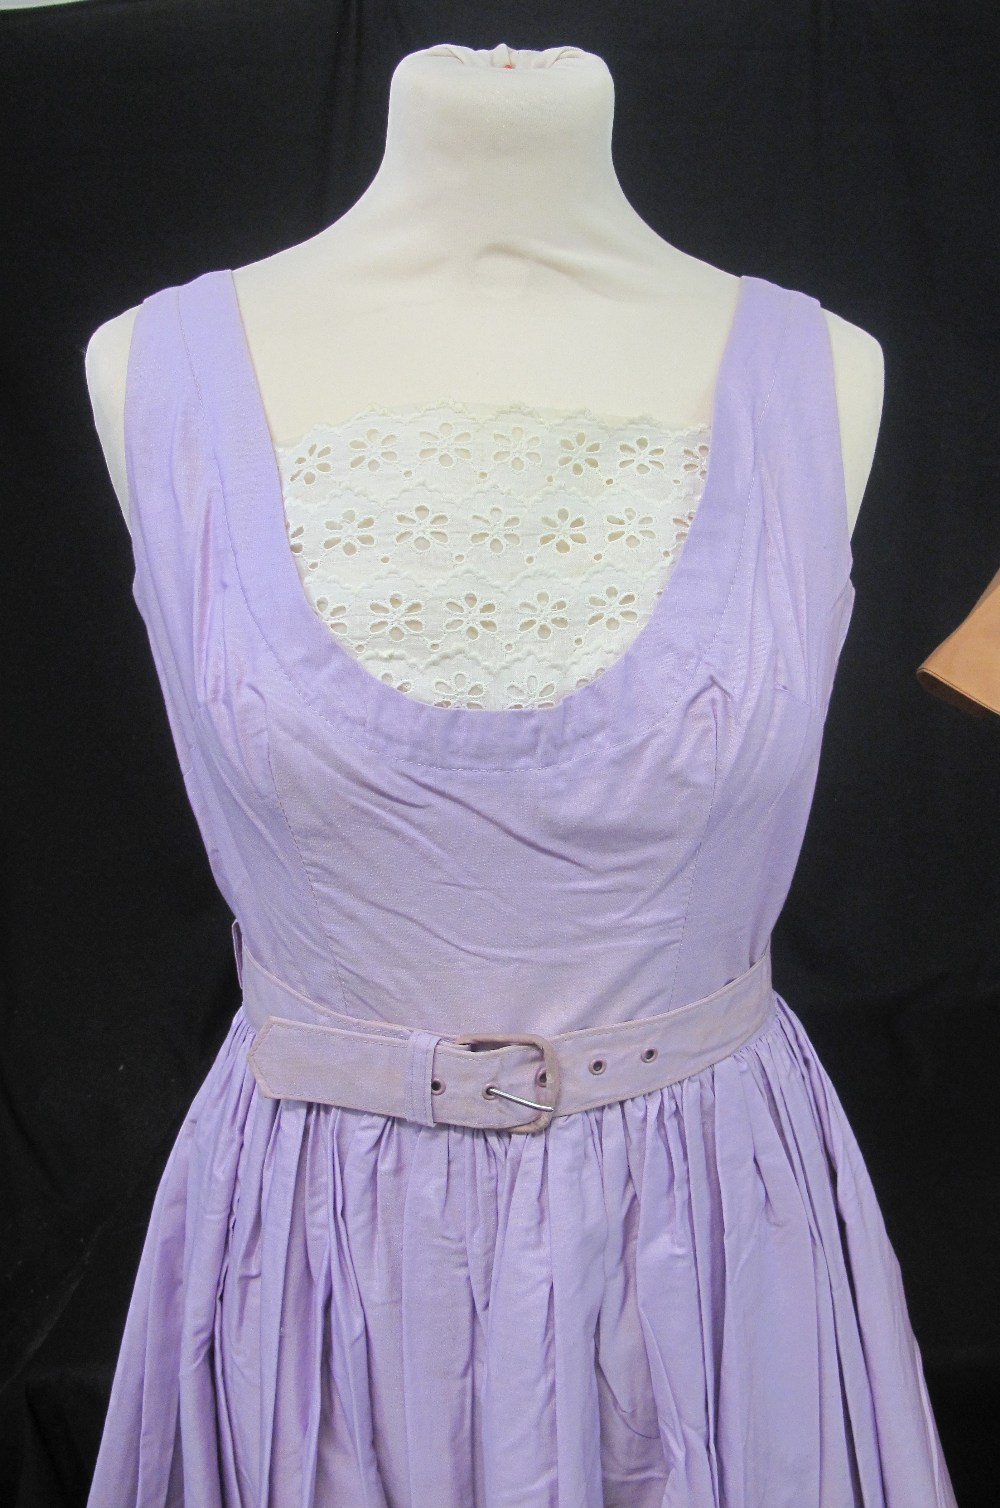 Five cotton 1950's summer dresses to include: lilac belted dress with lace insert, - Image 7 of 8